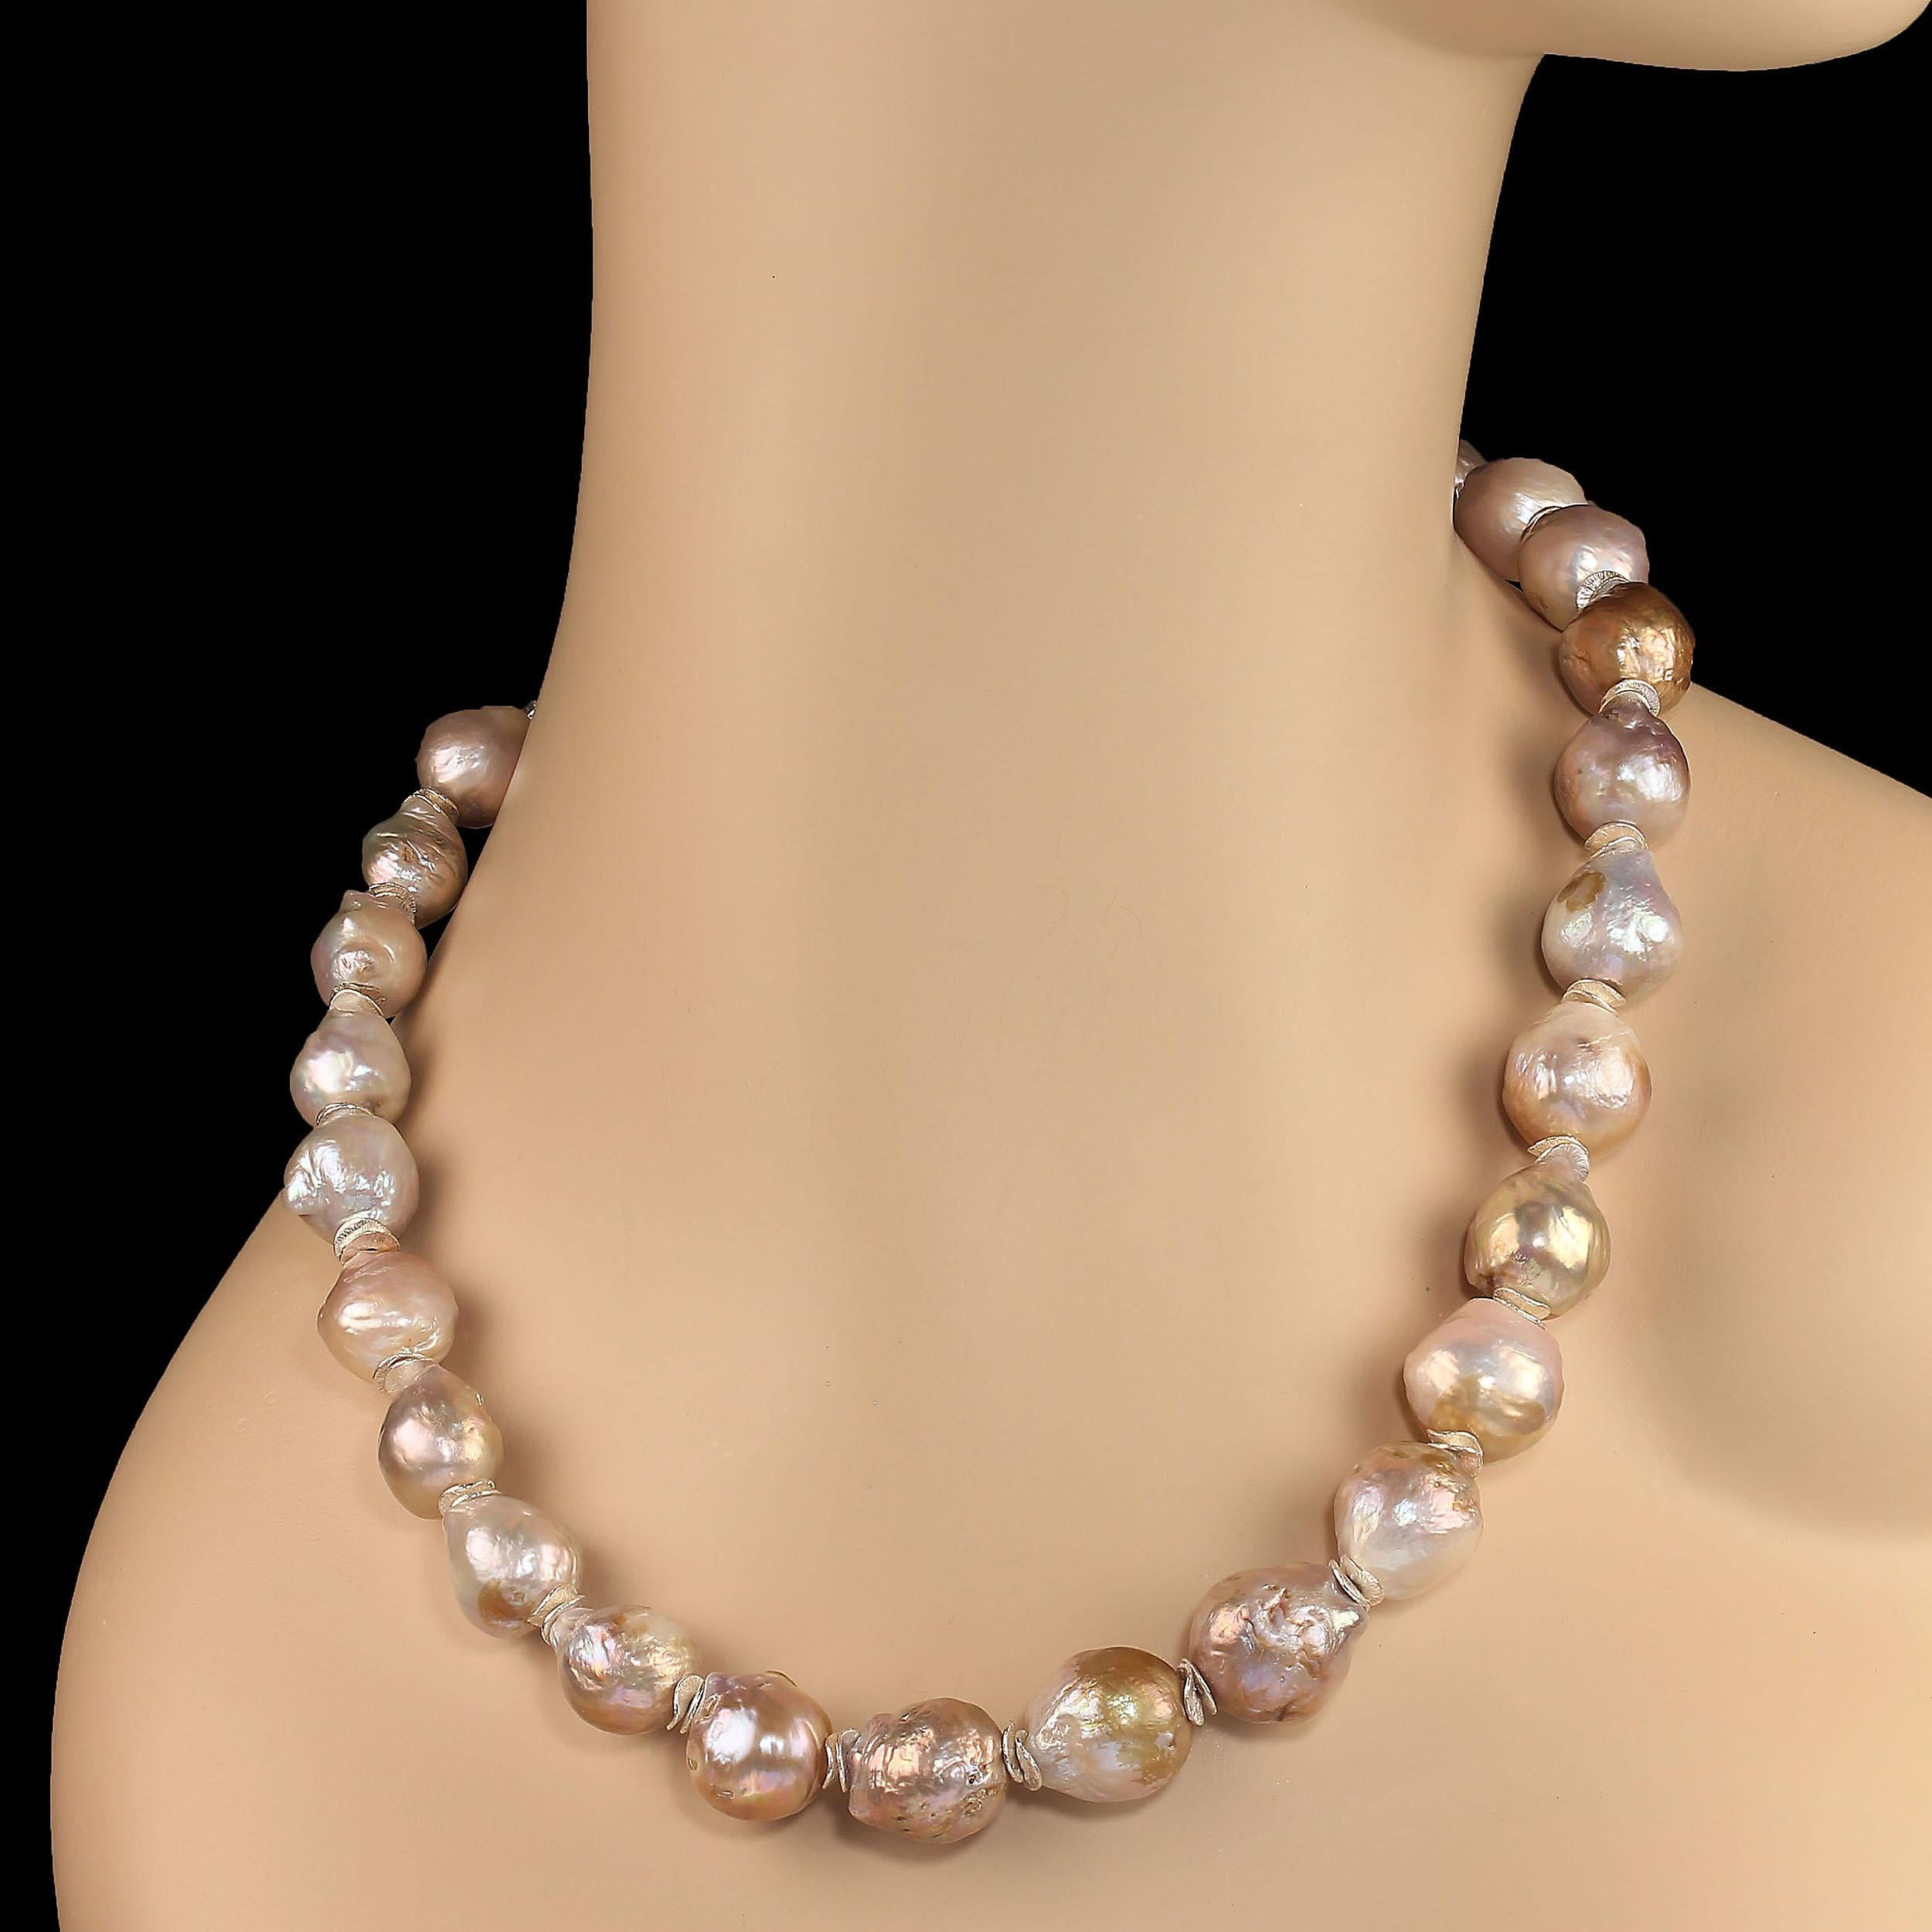 Elegant 19-inch cocktail or dinner party necklace. This necklace is 11-15 MM silvery iridescent baroque pearls with touches of gold and mauve. The silvery flutters accent the silvery tone of the pearls. This 19-inch necklace is secured with a 'S'